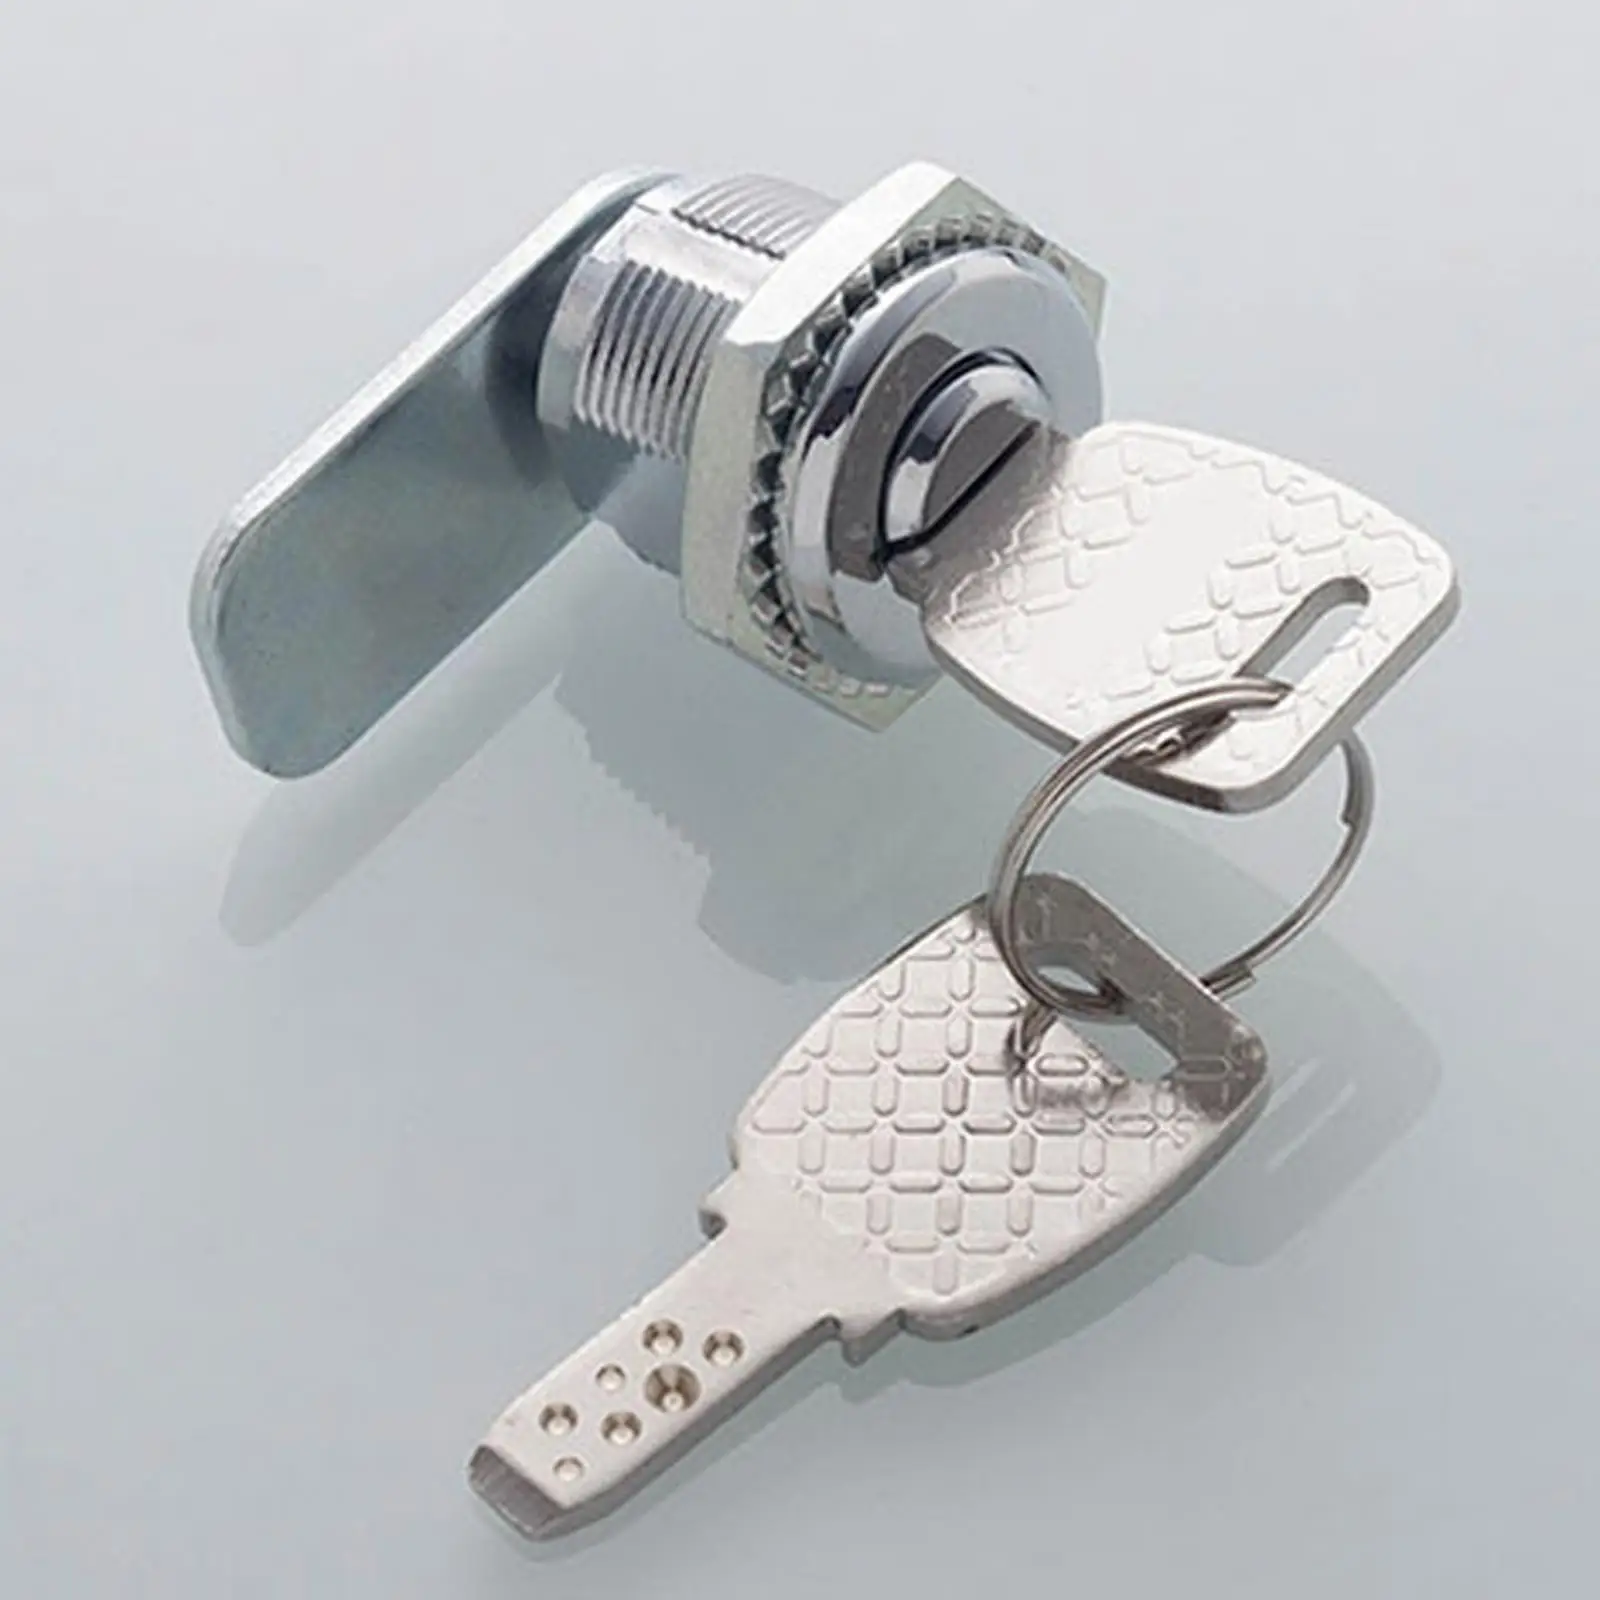 Cabinet cam Lock Hardware Zinc Alloy for Postal Box File Drawer Pay Phone